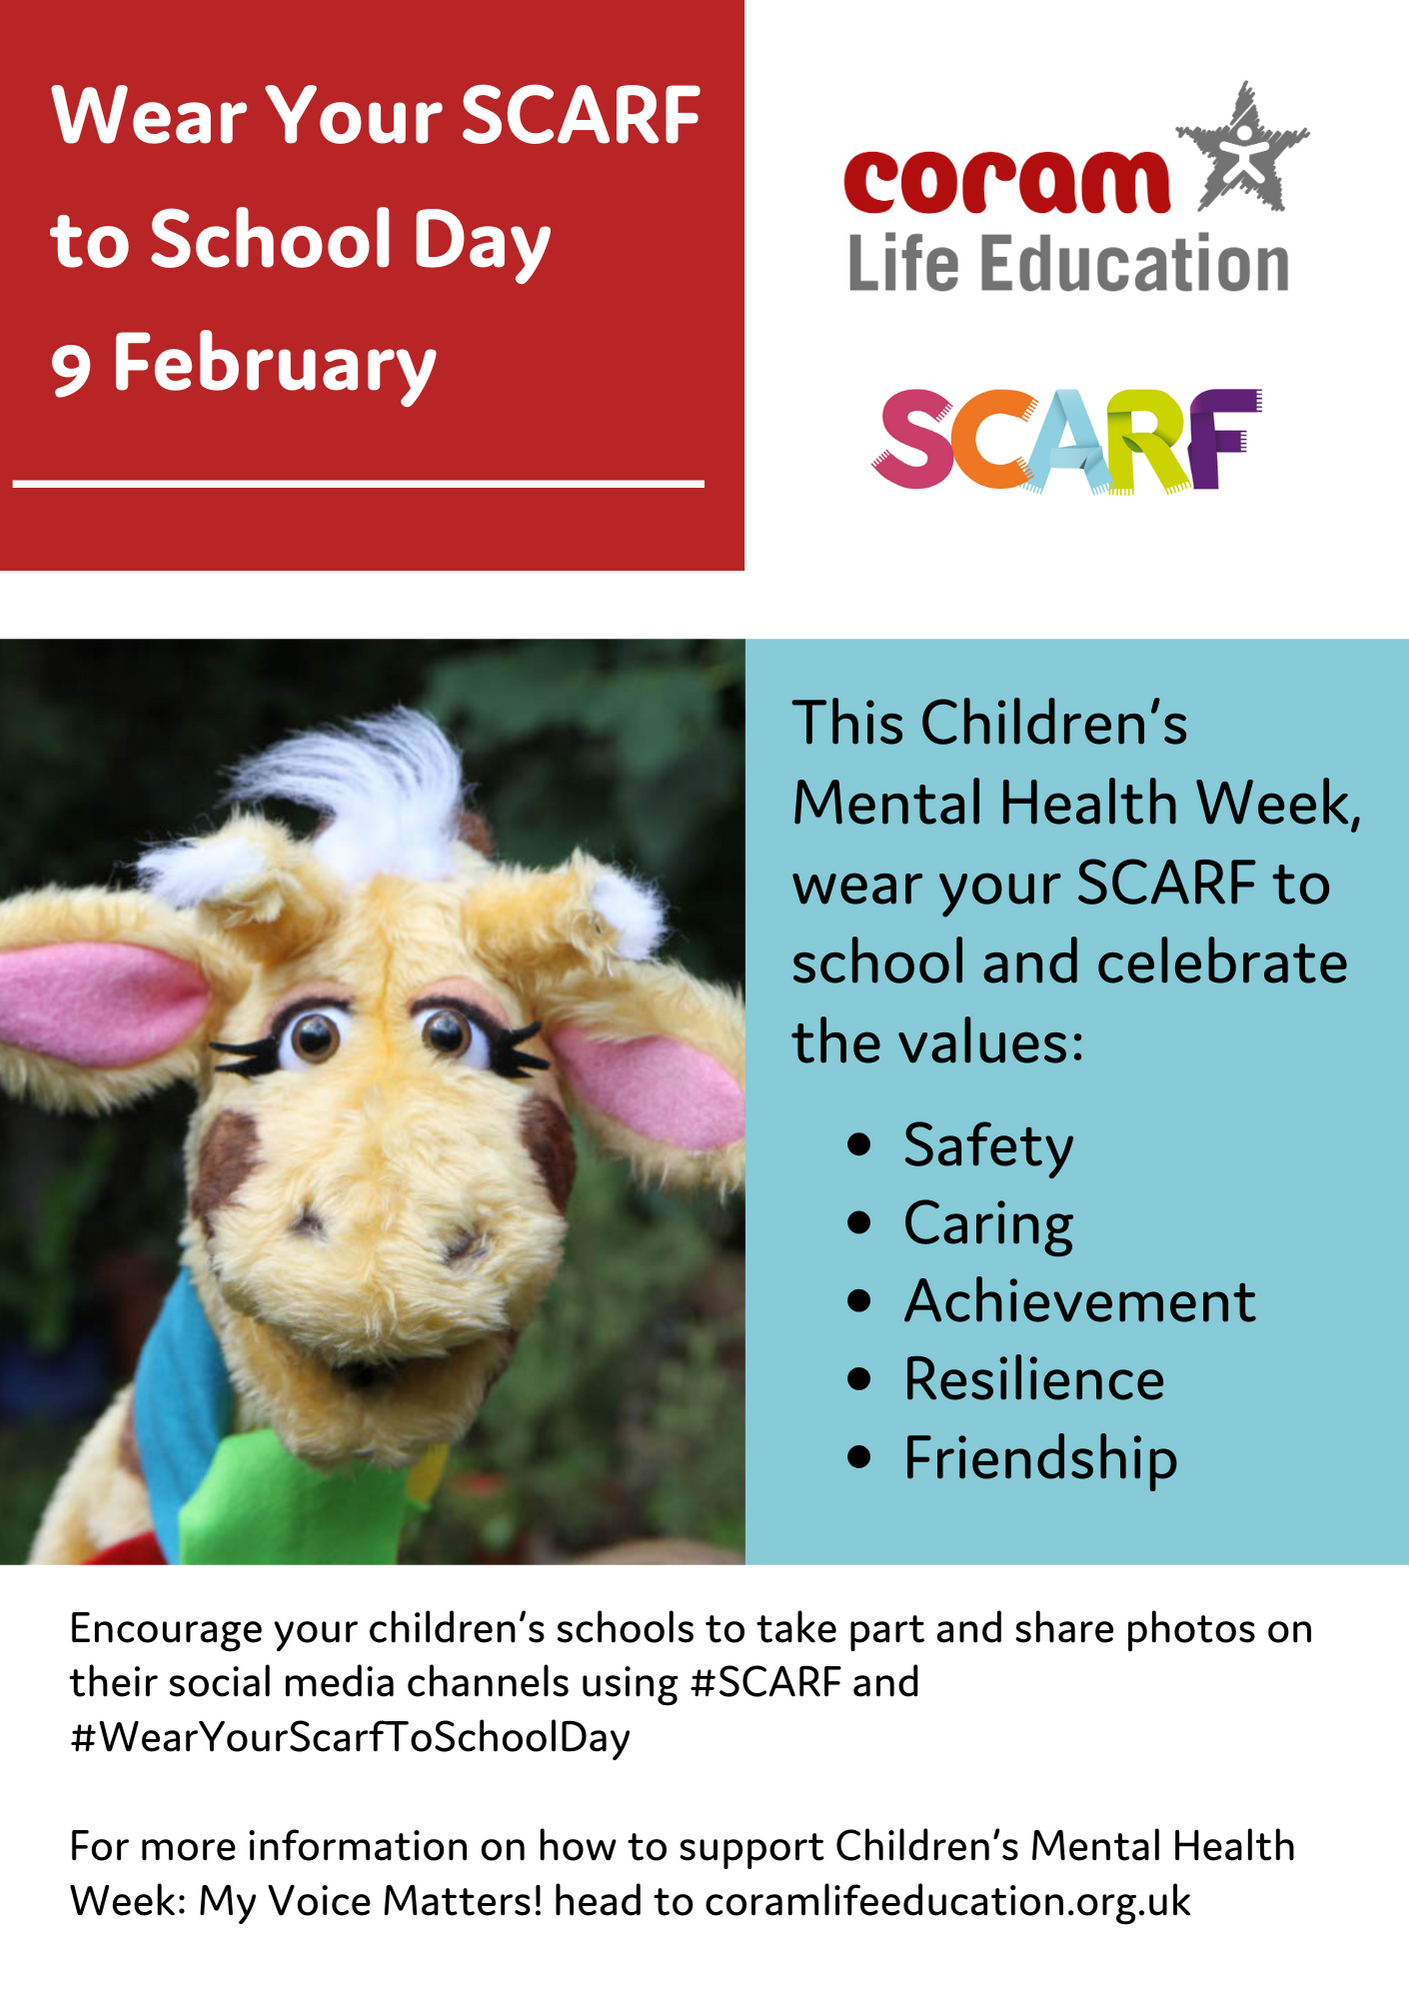 Wear Your Scarf to School Day flyer